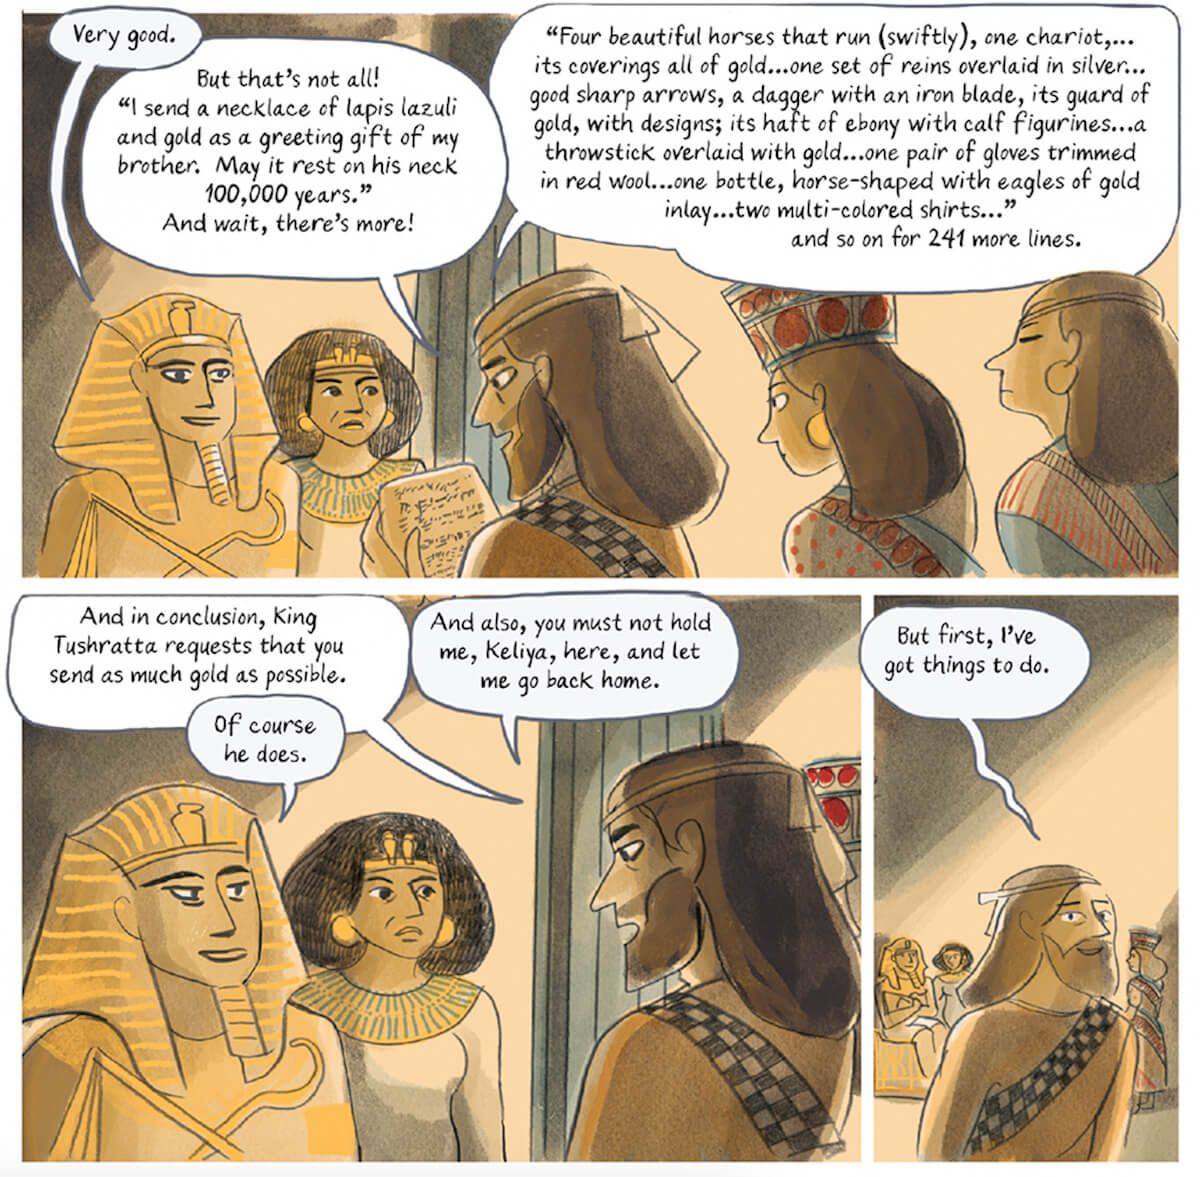 An exchange between Keliya, Chief Minister of Tushratta of Mitanni, and Amenhotep III. Text and illustration by Glynnis Fawkes.